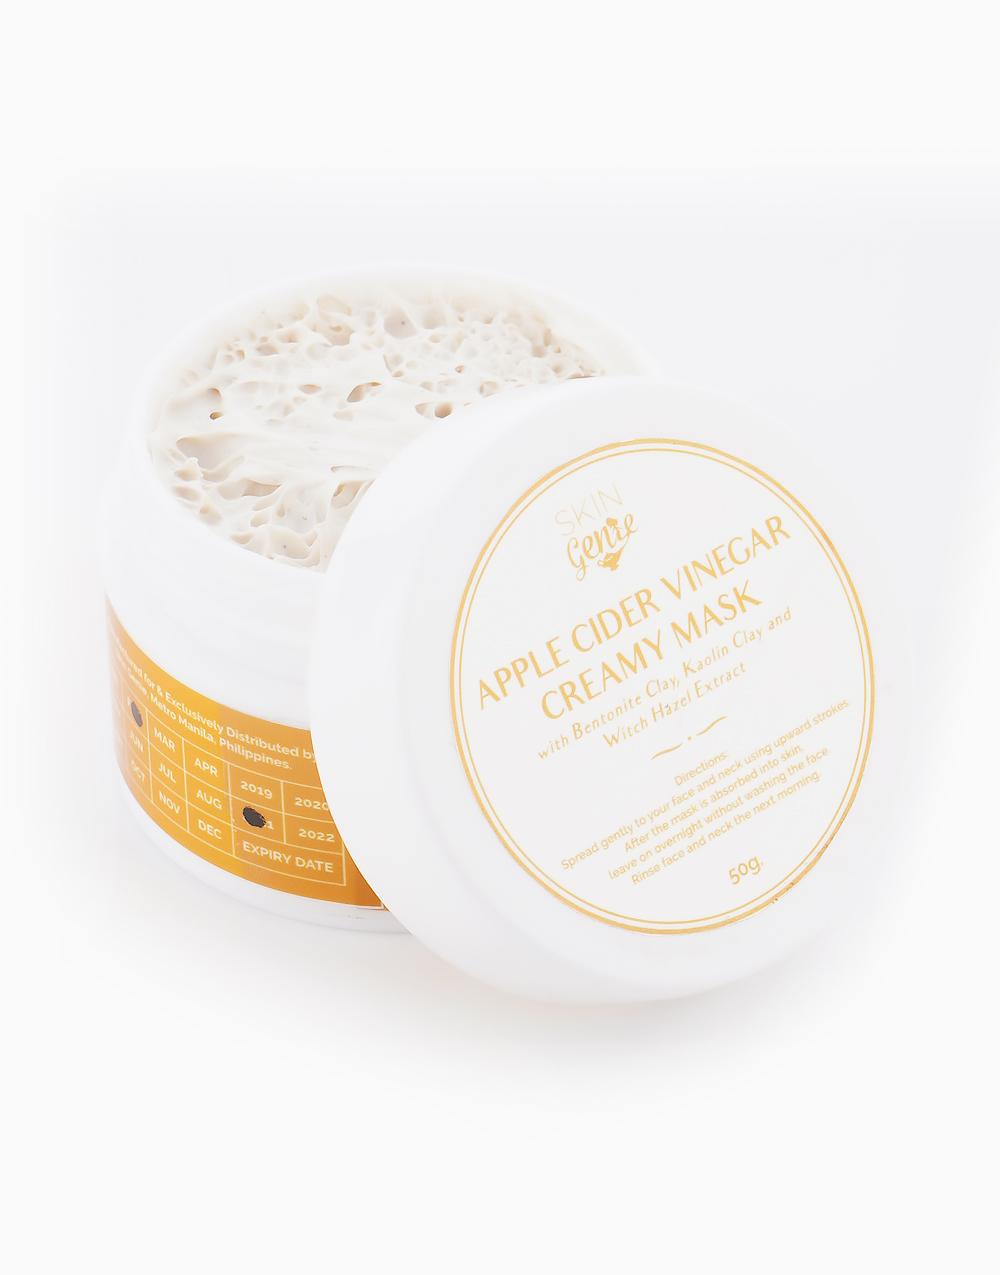 Apple Cider Vinegar Creamy Mask with Bentonite Clay, Kaolin Clay and Witch Hazel Extract